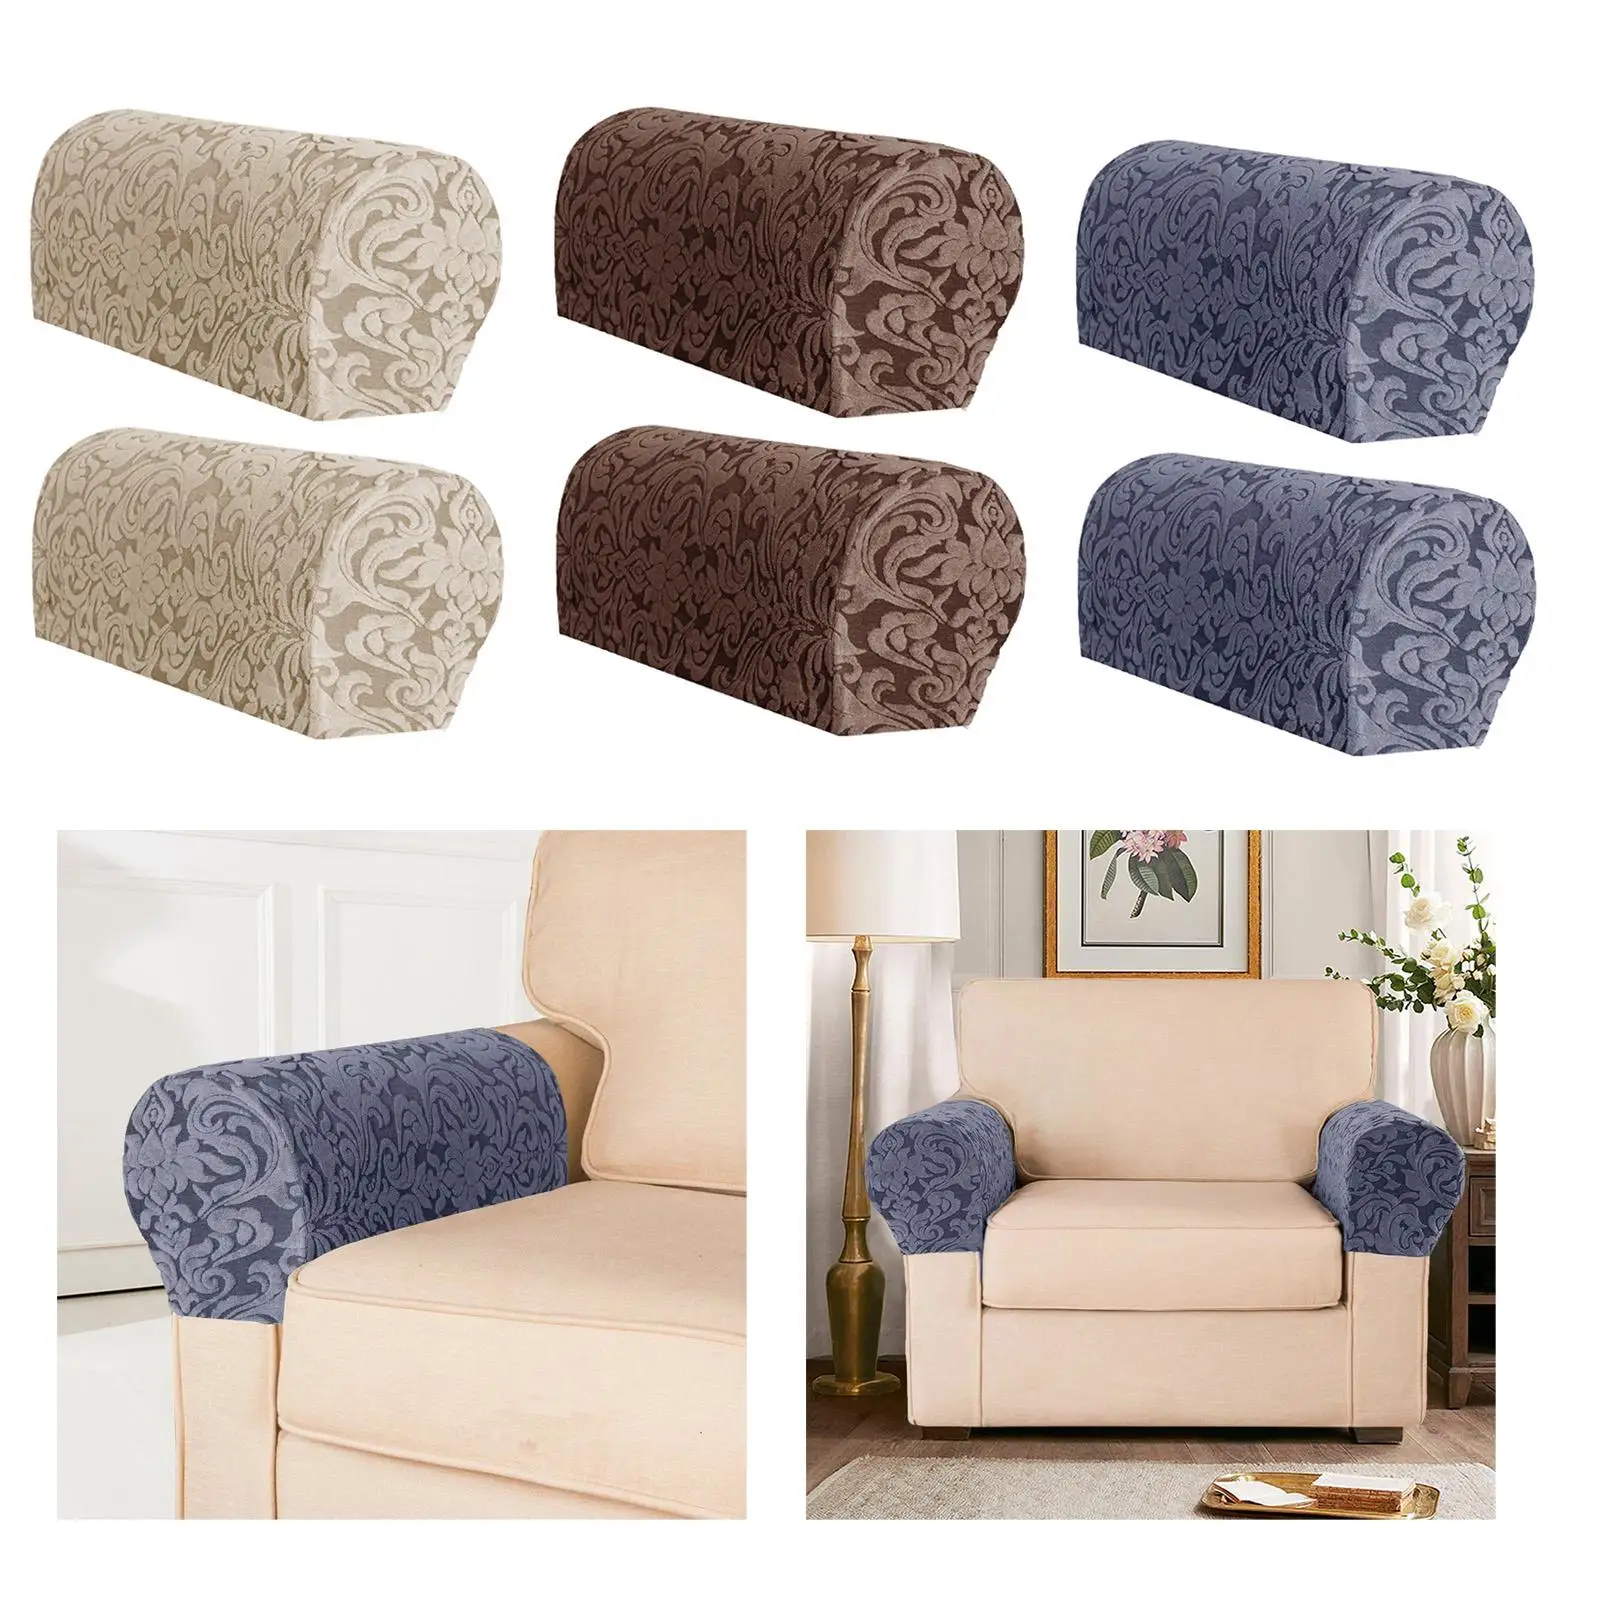 Stretch Armrest Covers Jacquard Sofa Arm Covers Protection Accessories Machine Washable Removable Comfortable Easily Install